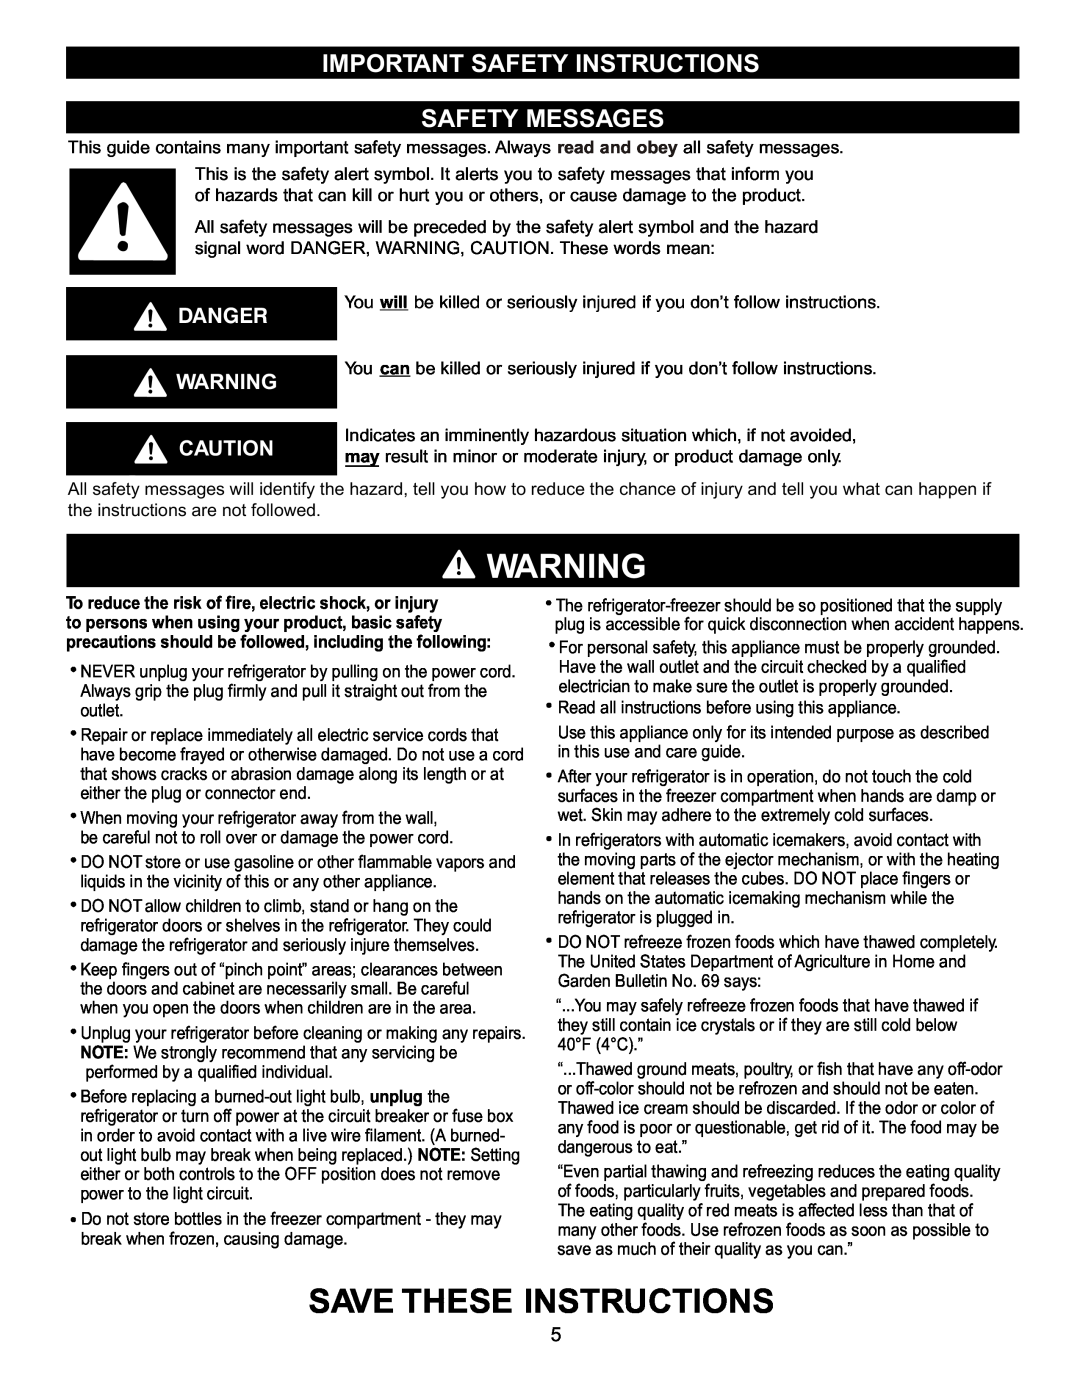 LG Electronics LFC20740, LFC22740 Important Safety Instructions Safety Messages, Danger, Save These Instructions 